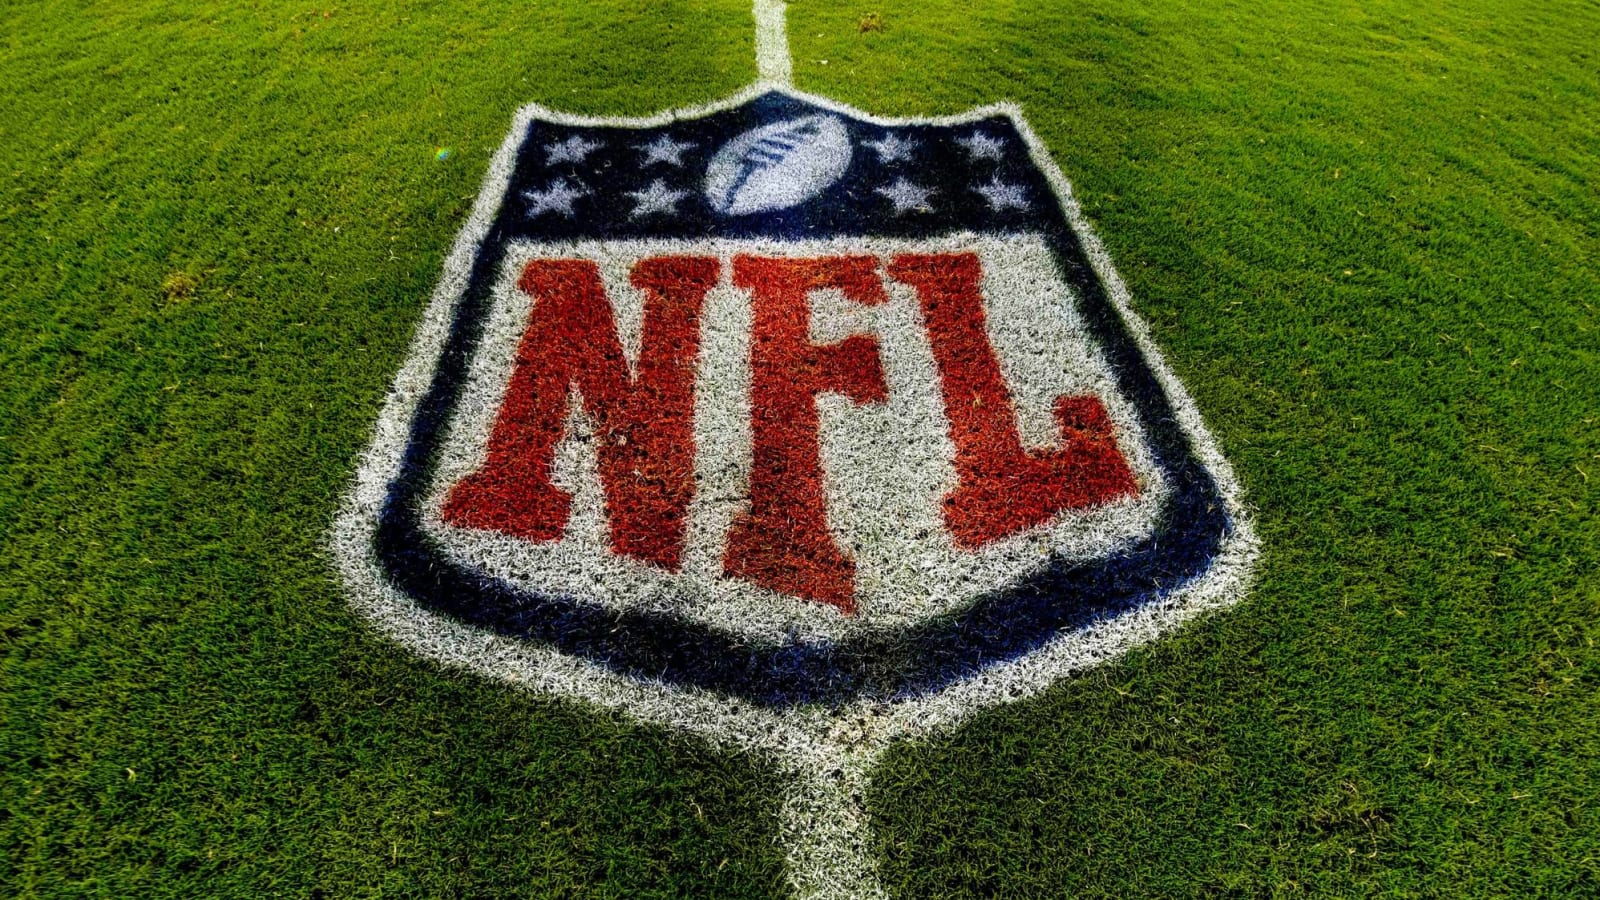 NFL player COVID-19 vaccination rate up slightly to 93.5%